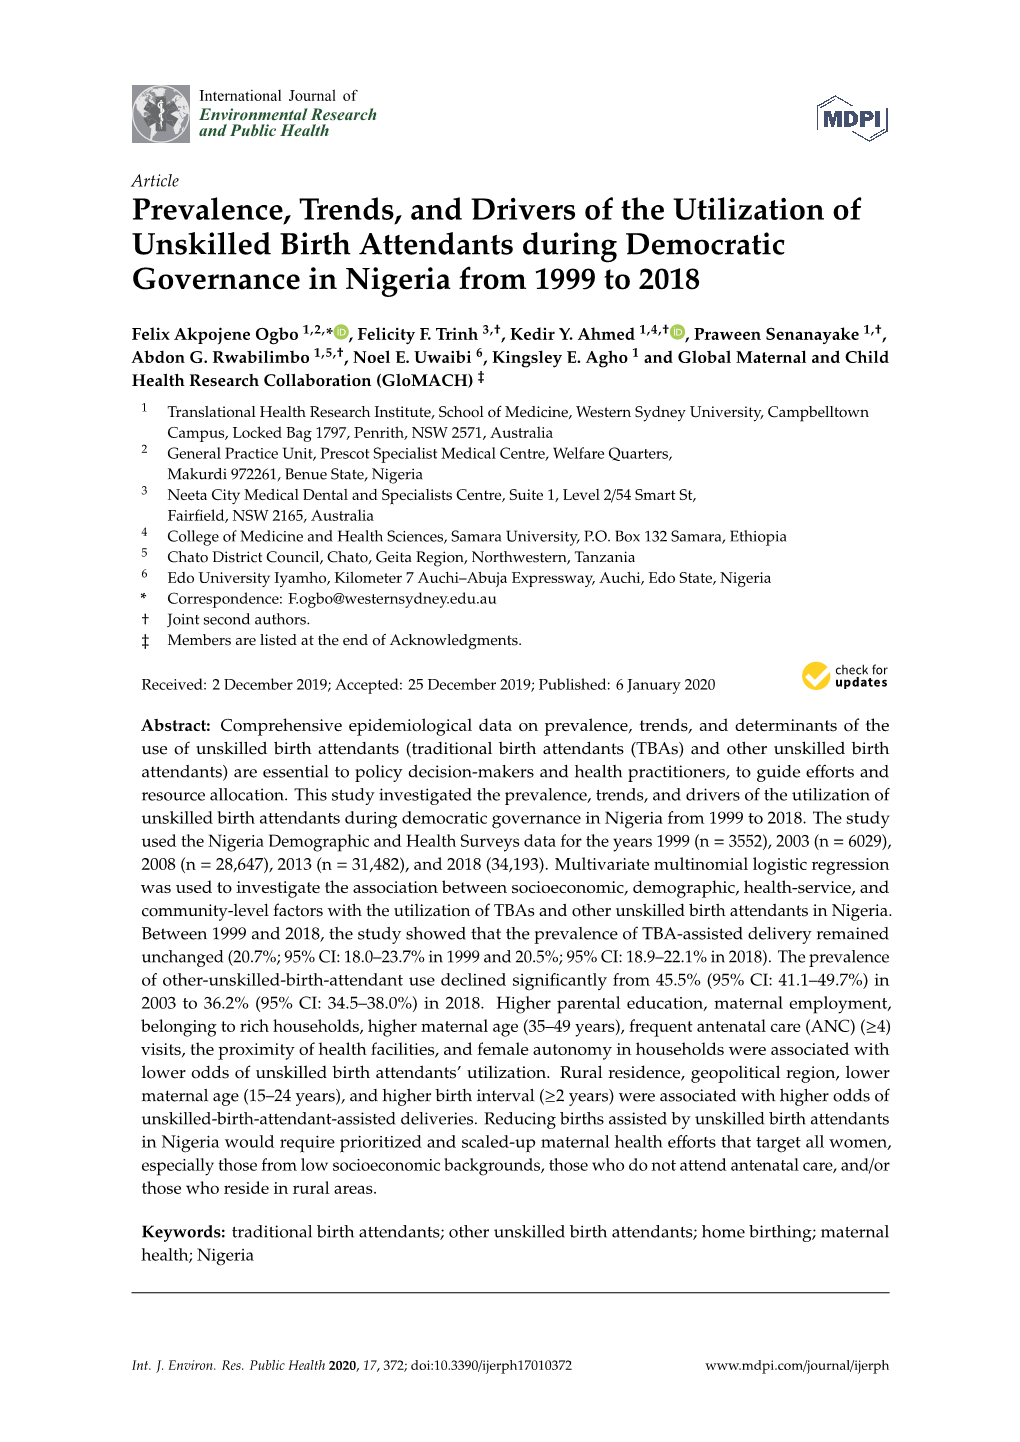 Prevalence, Trends, and Drivers of the Utilization of Unskilled Birth Attendants During Democratic Governance in Nigeria from 1999 to 2018